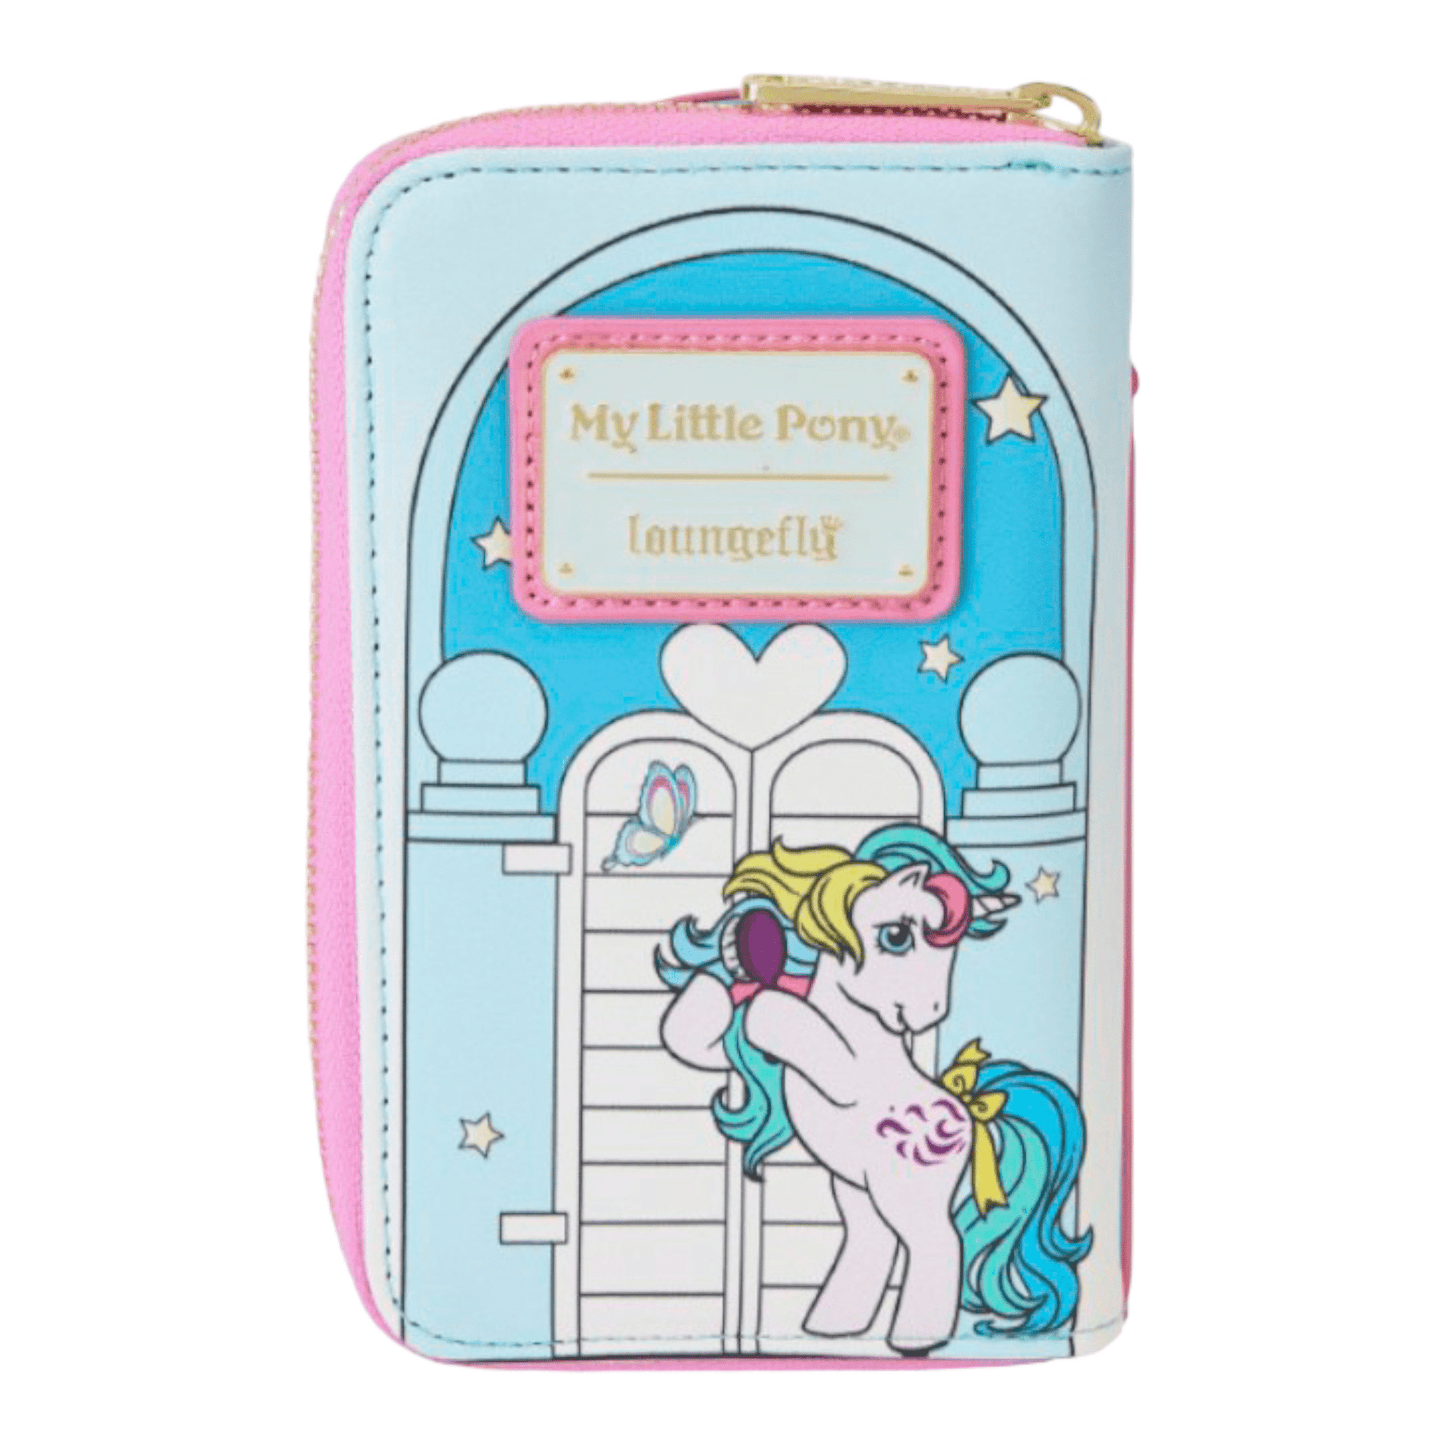 Portefeuille - 40Th Anniversary Pretty Parlor - My Little Pony - Loungefly J'M T Créa